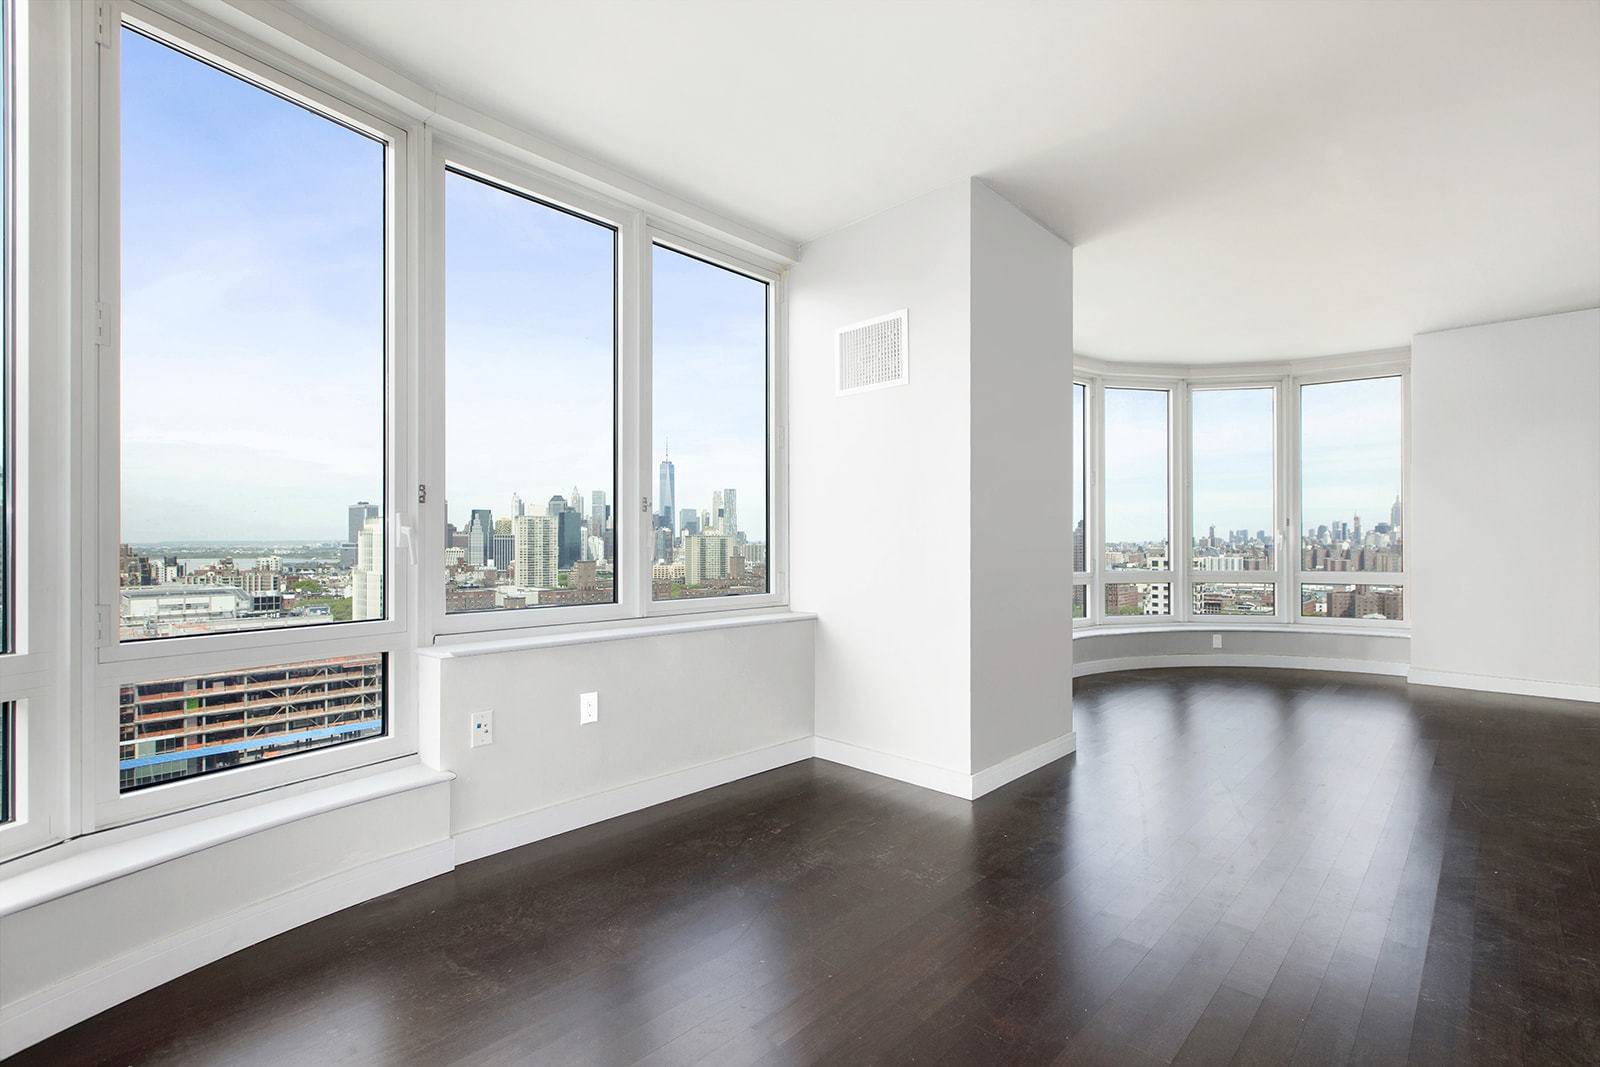 The MOST spectacular views in Brooklyn, panoramic skyline views of Manhattan, including THREE bridge view.